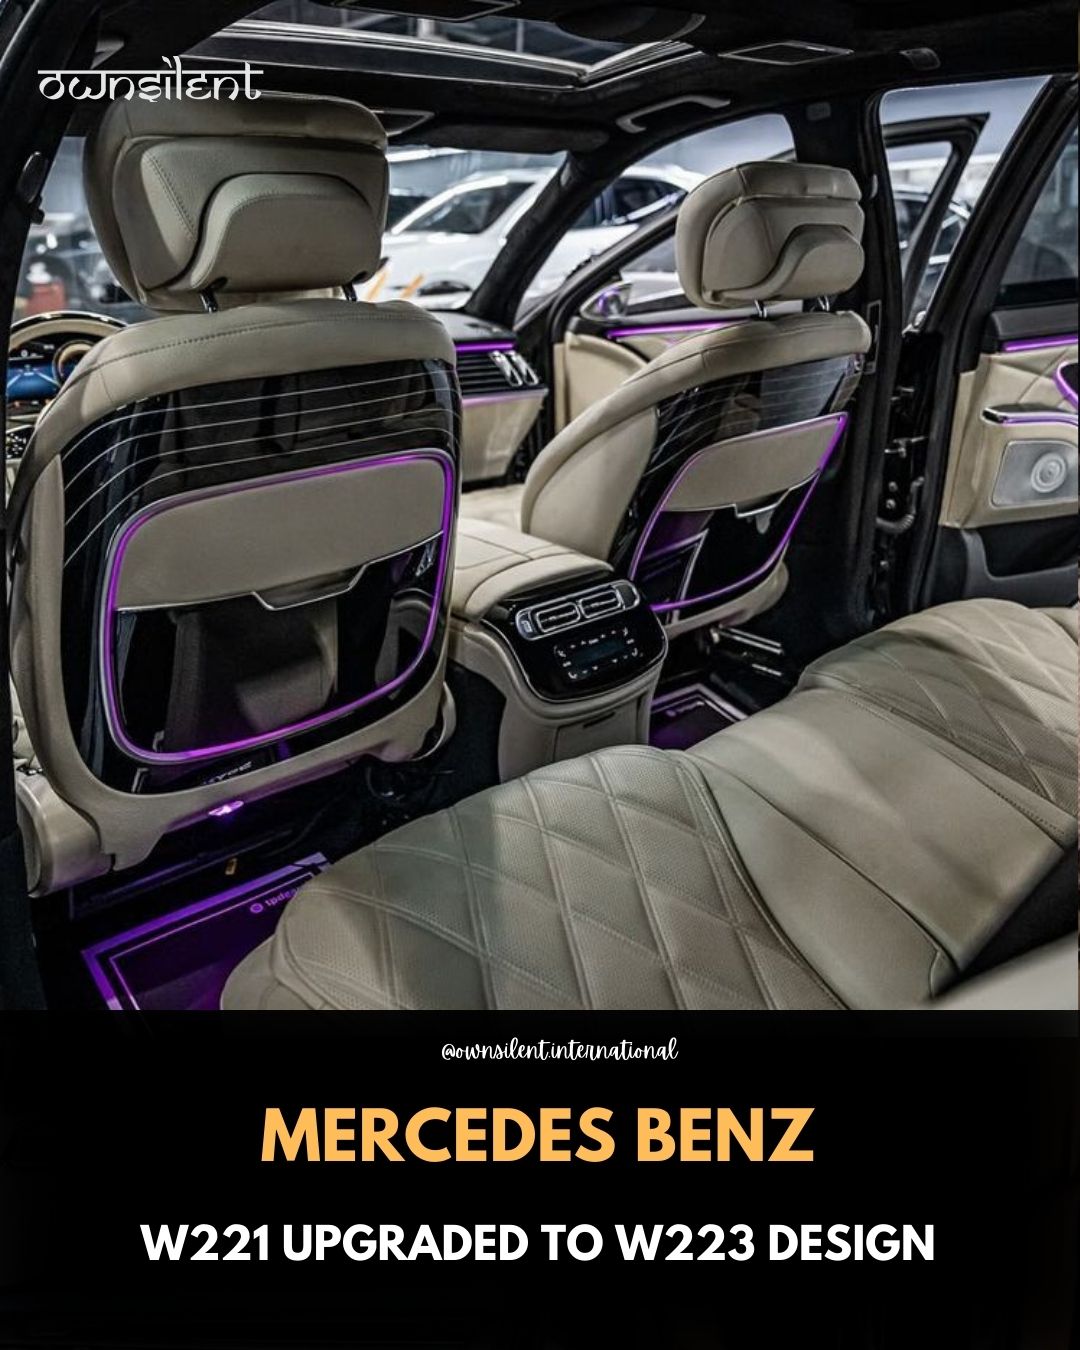 Mercedes-Benz W221 Interior Exterior Facelift To W223 Body Kit Own Silent International LIMITED    